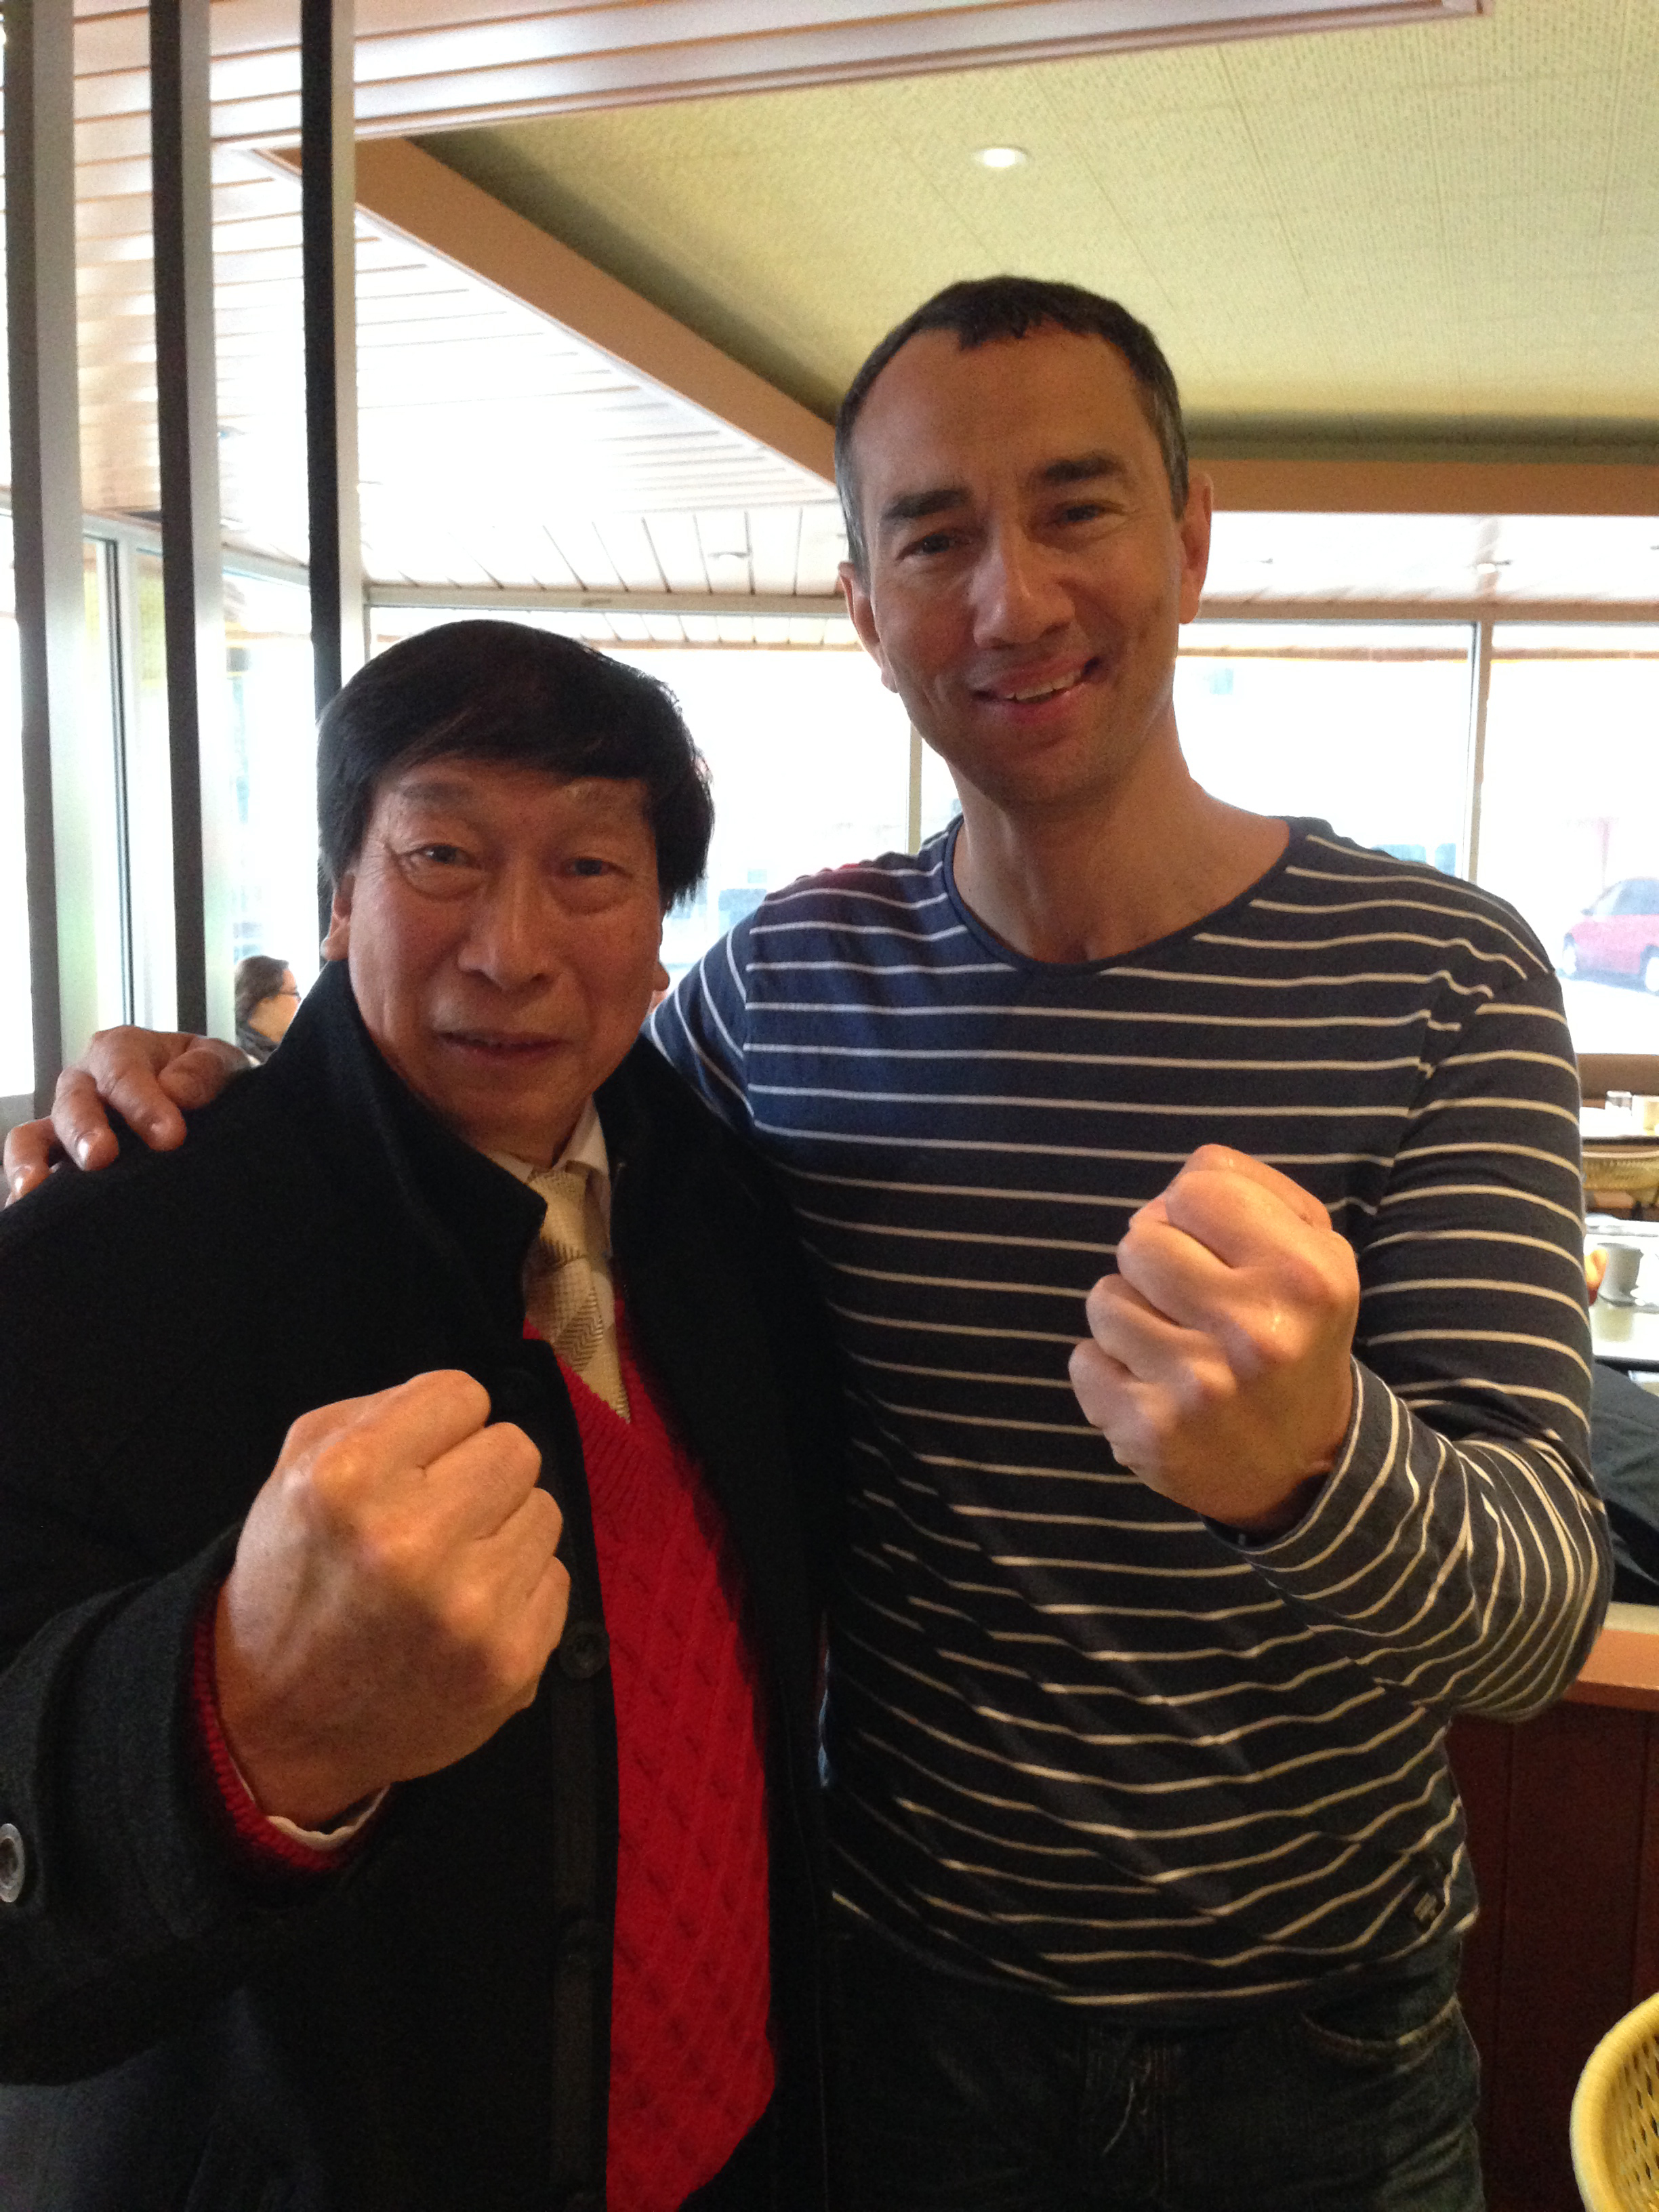 With Hong Kong action star Chui Chi Ling of Kung Fu Hustle here in Atlantic City NJ for the Martial Arts Hall of Fame & Expo